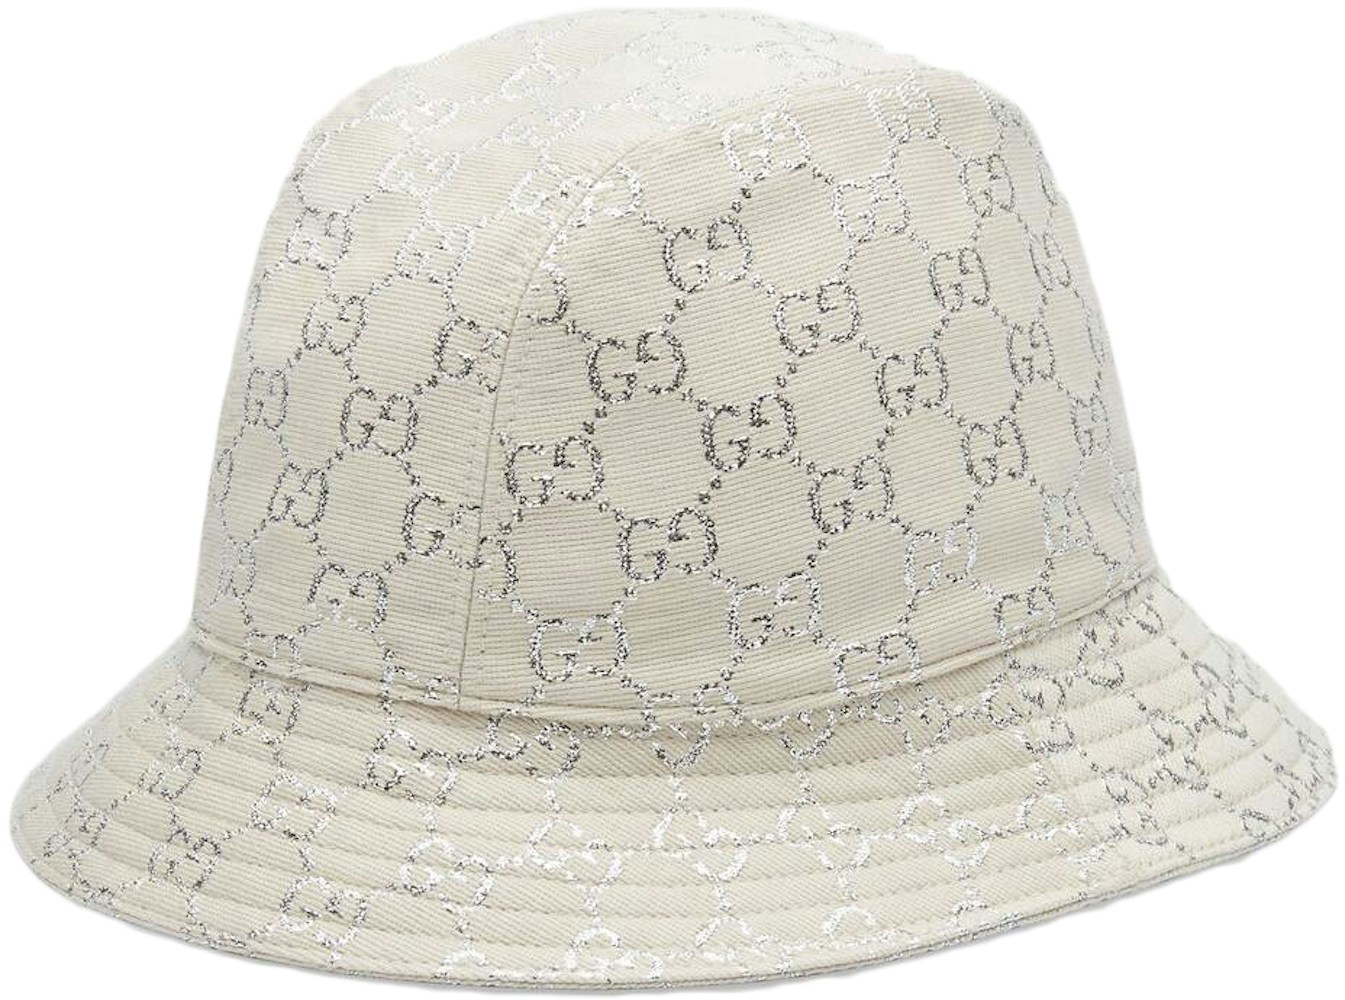 Gucci Gg Lame Bucket Hat White Silver In Lame